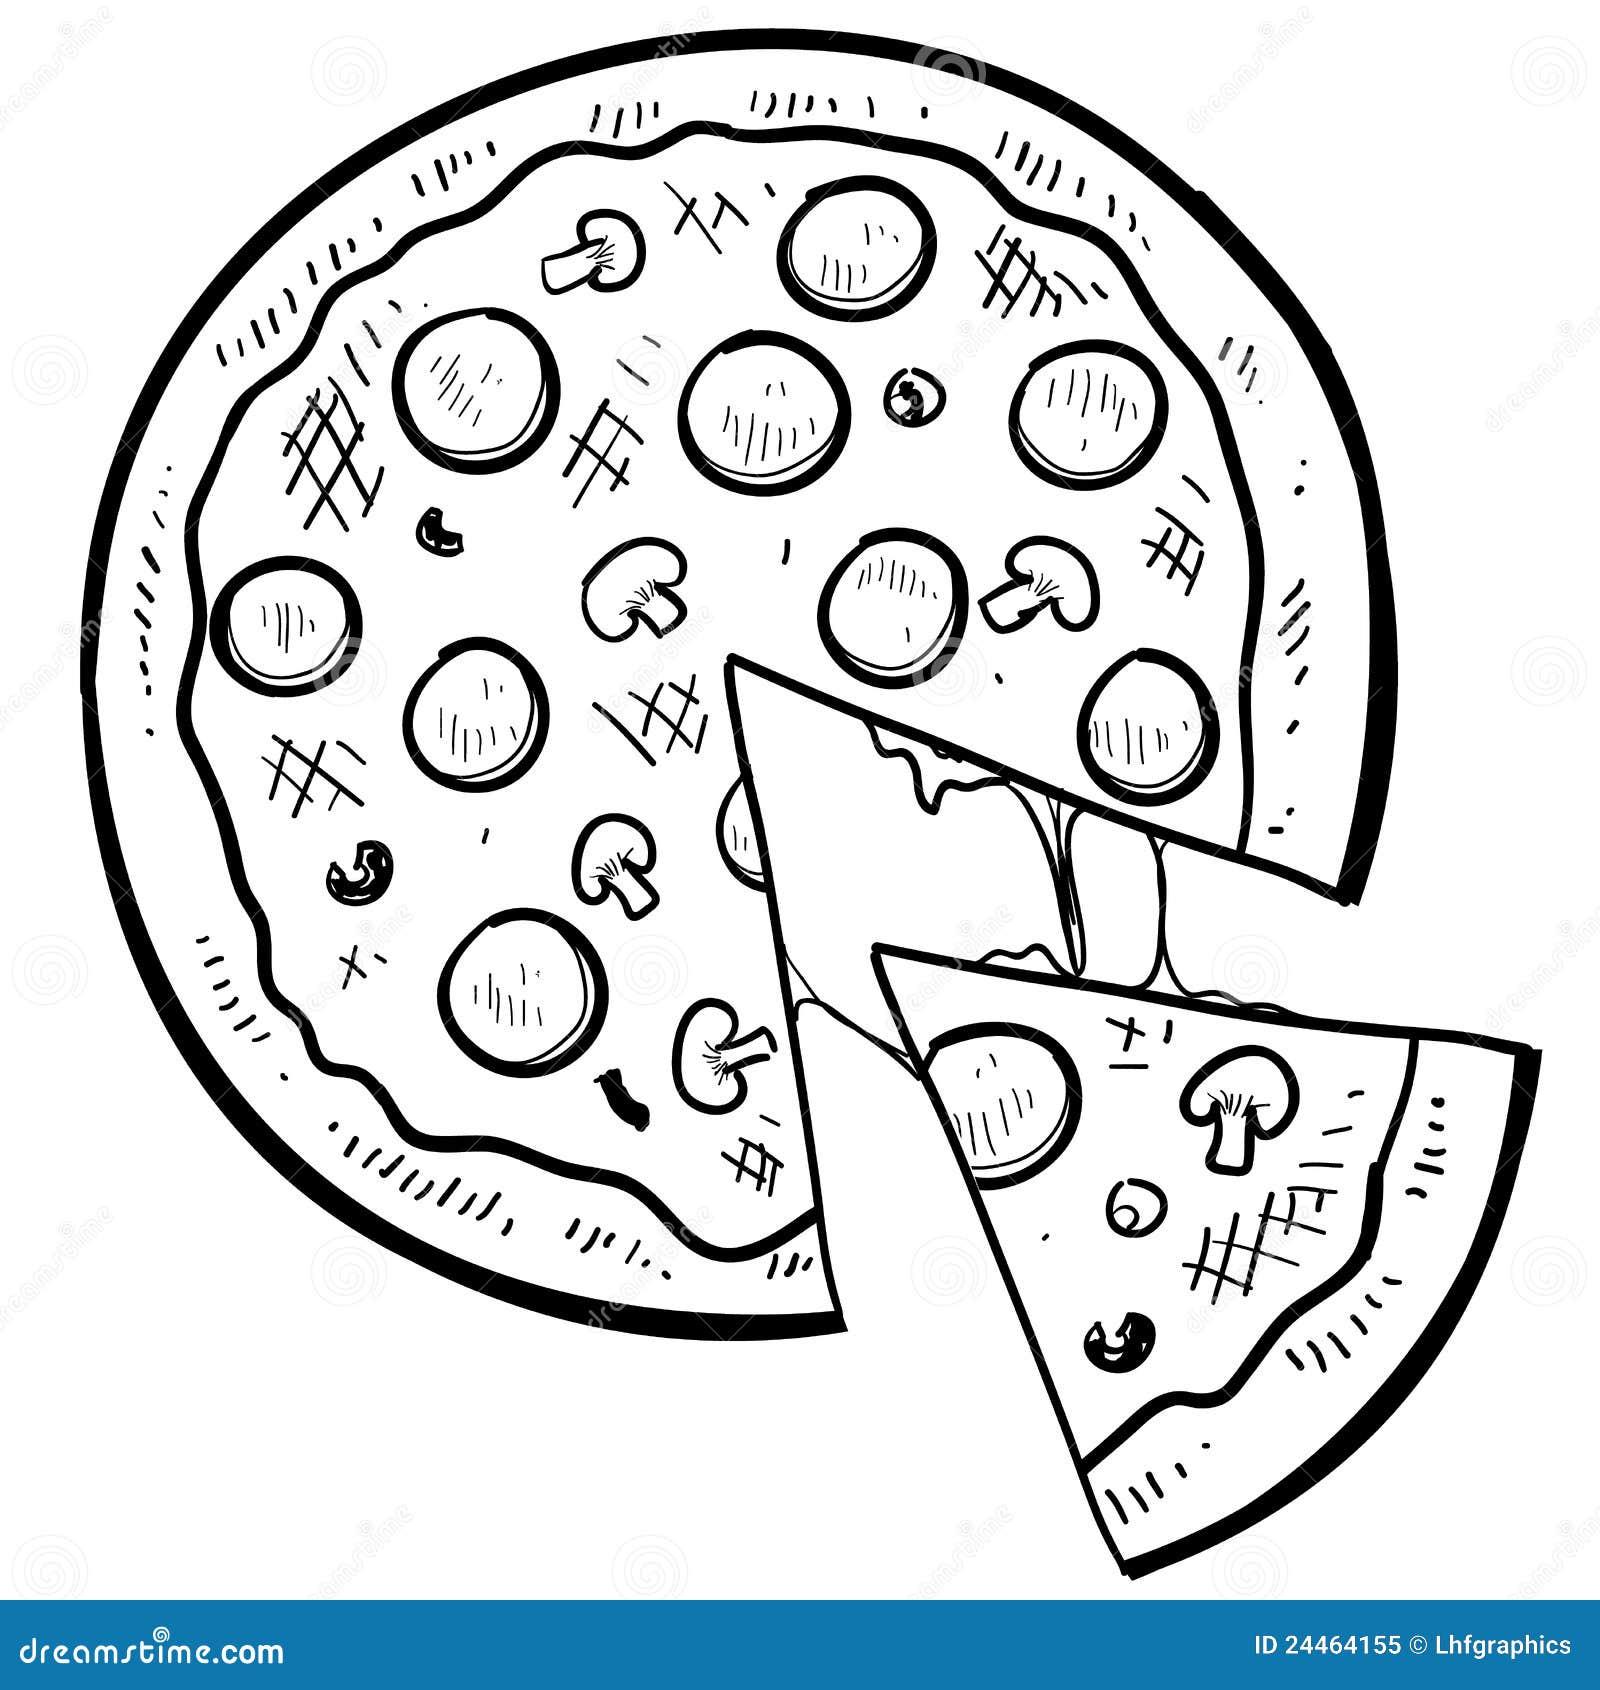 free black and white pizza clipart - photo #42